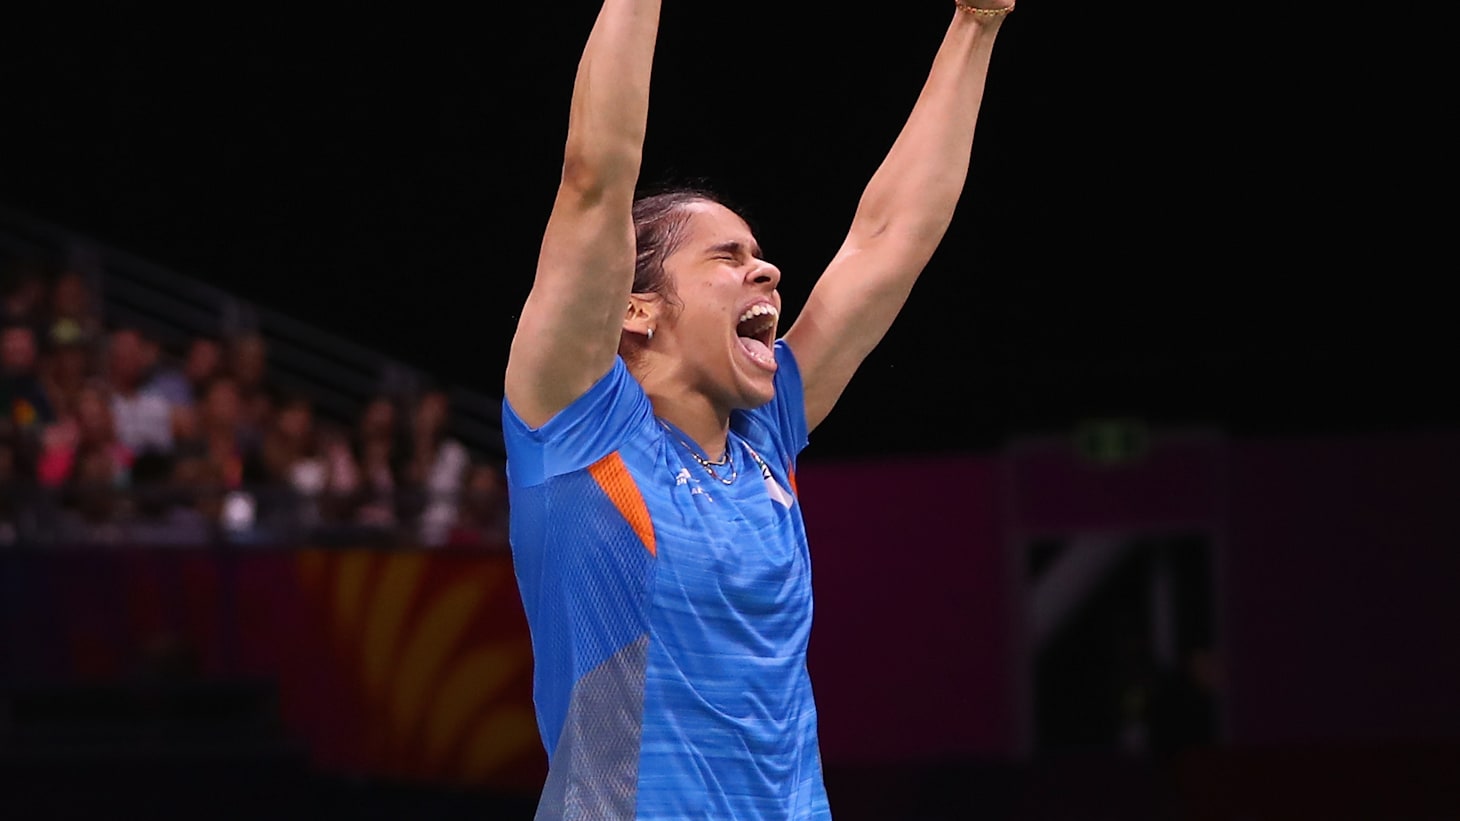 Saina Nehwals best Highlights of matches that defined her badminton career